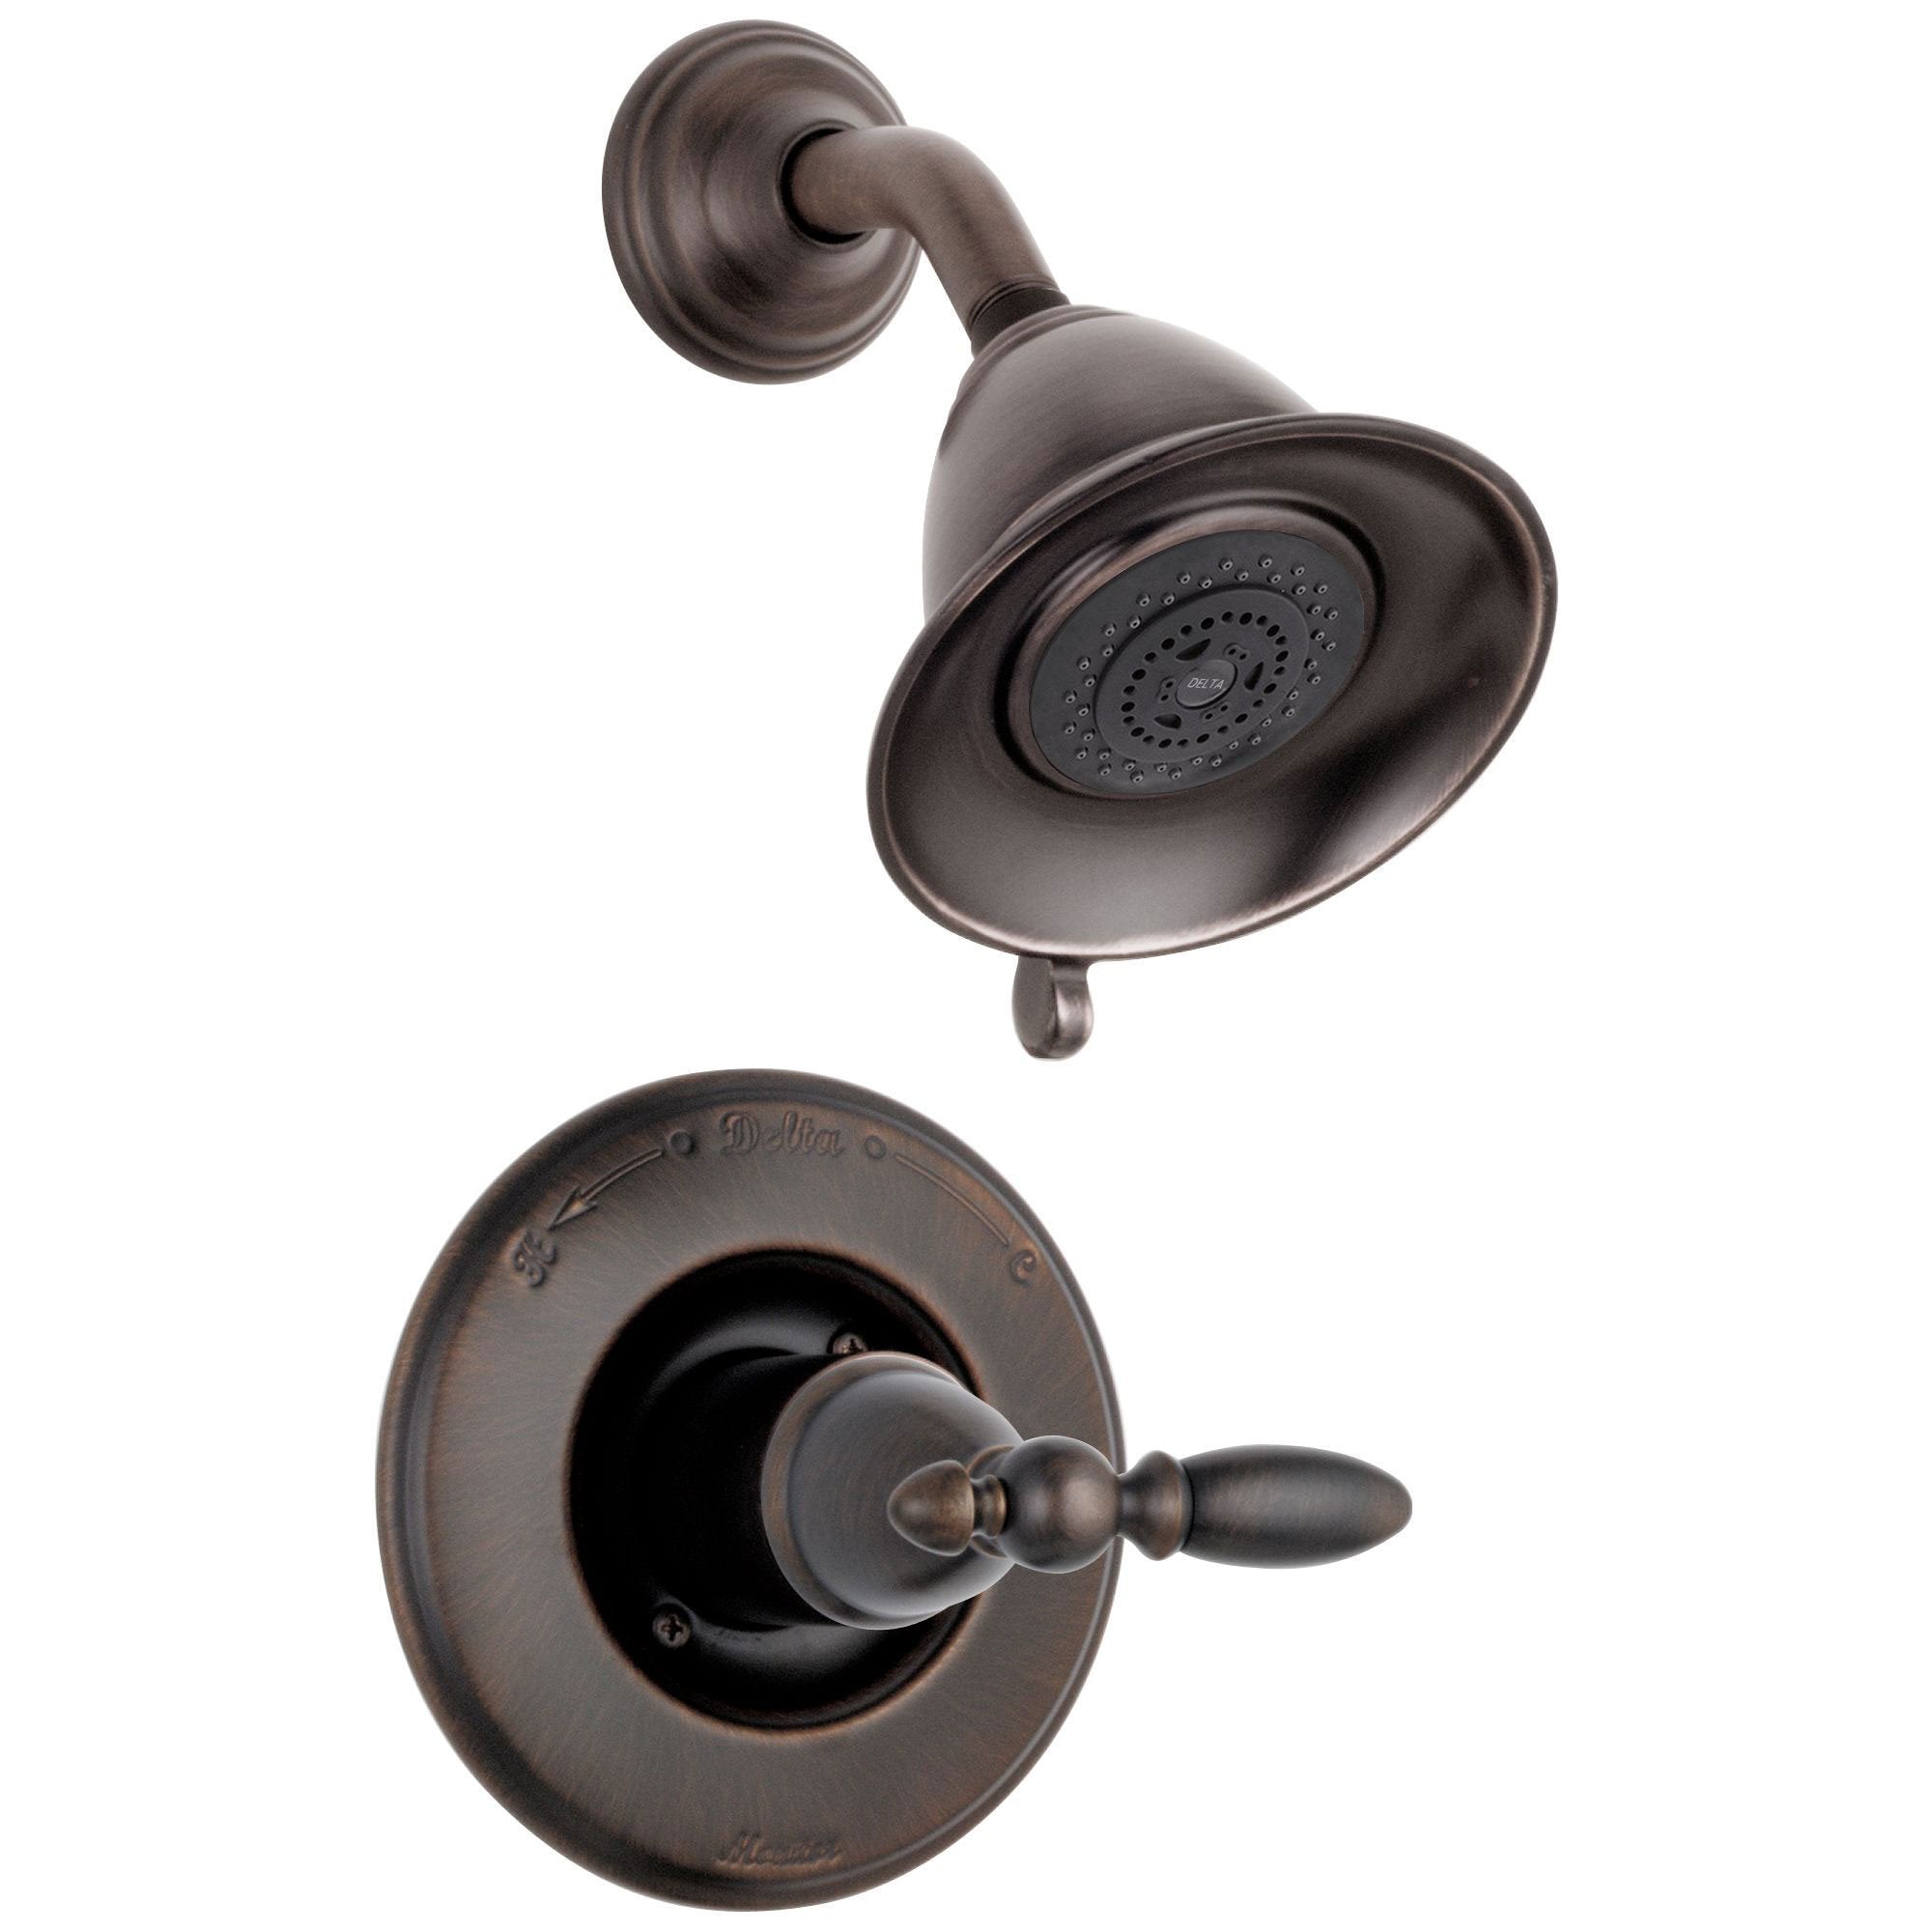 Delta Traditional Victorian Venetian Bronze Finish 14 Series Shower Only Faucet INCLUDES Rough-in Valve with Stops and Single Lever Handle D1199V